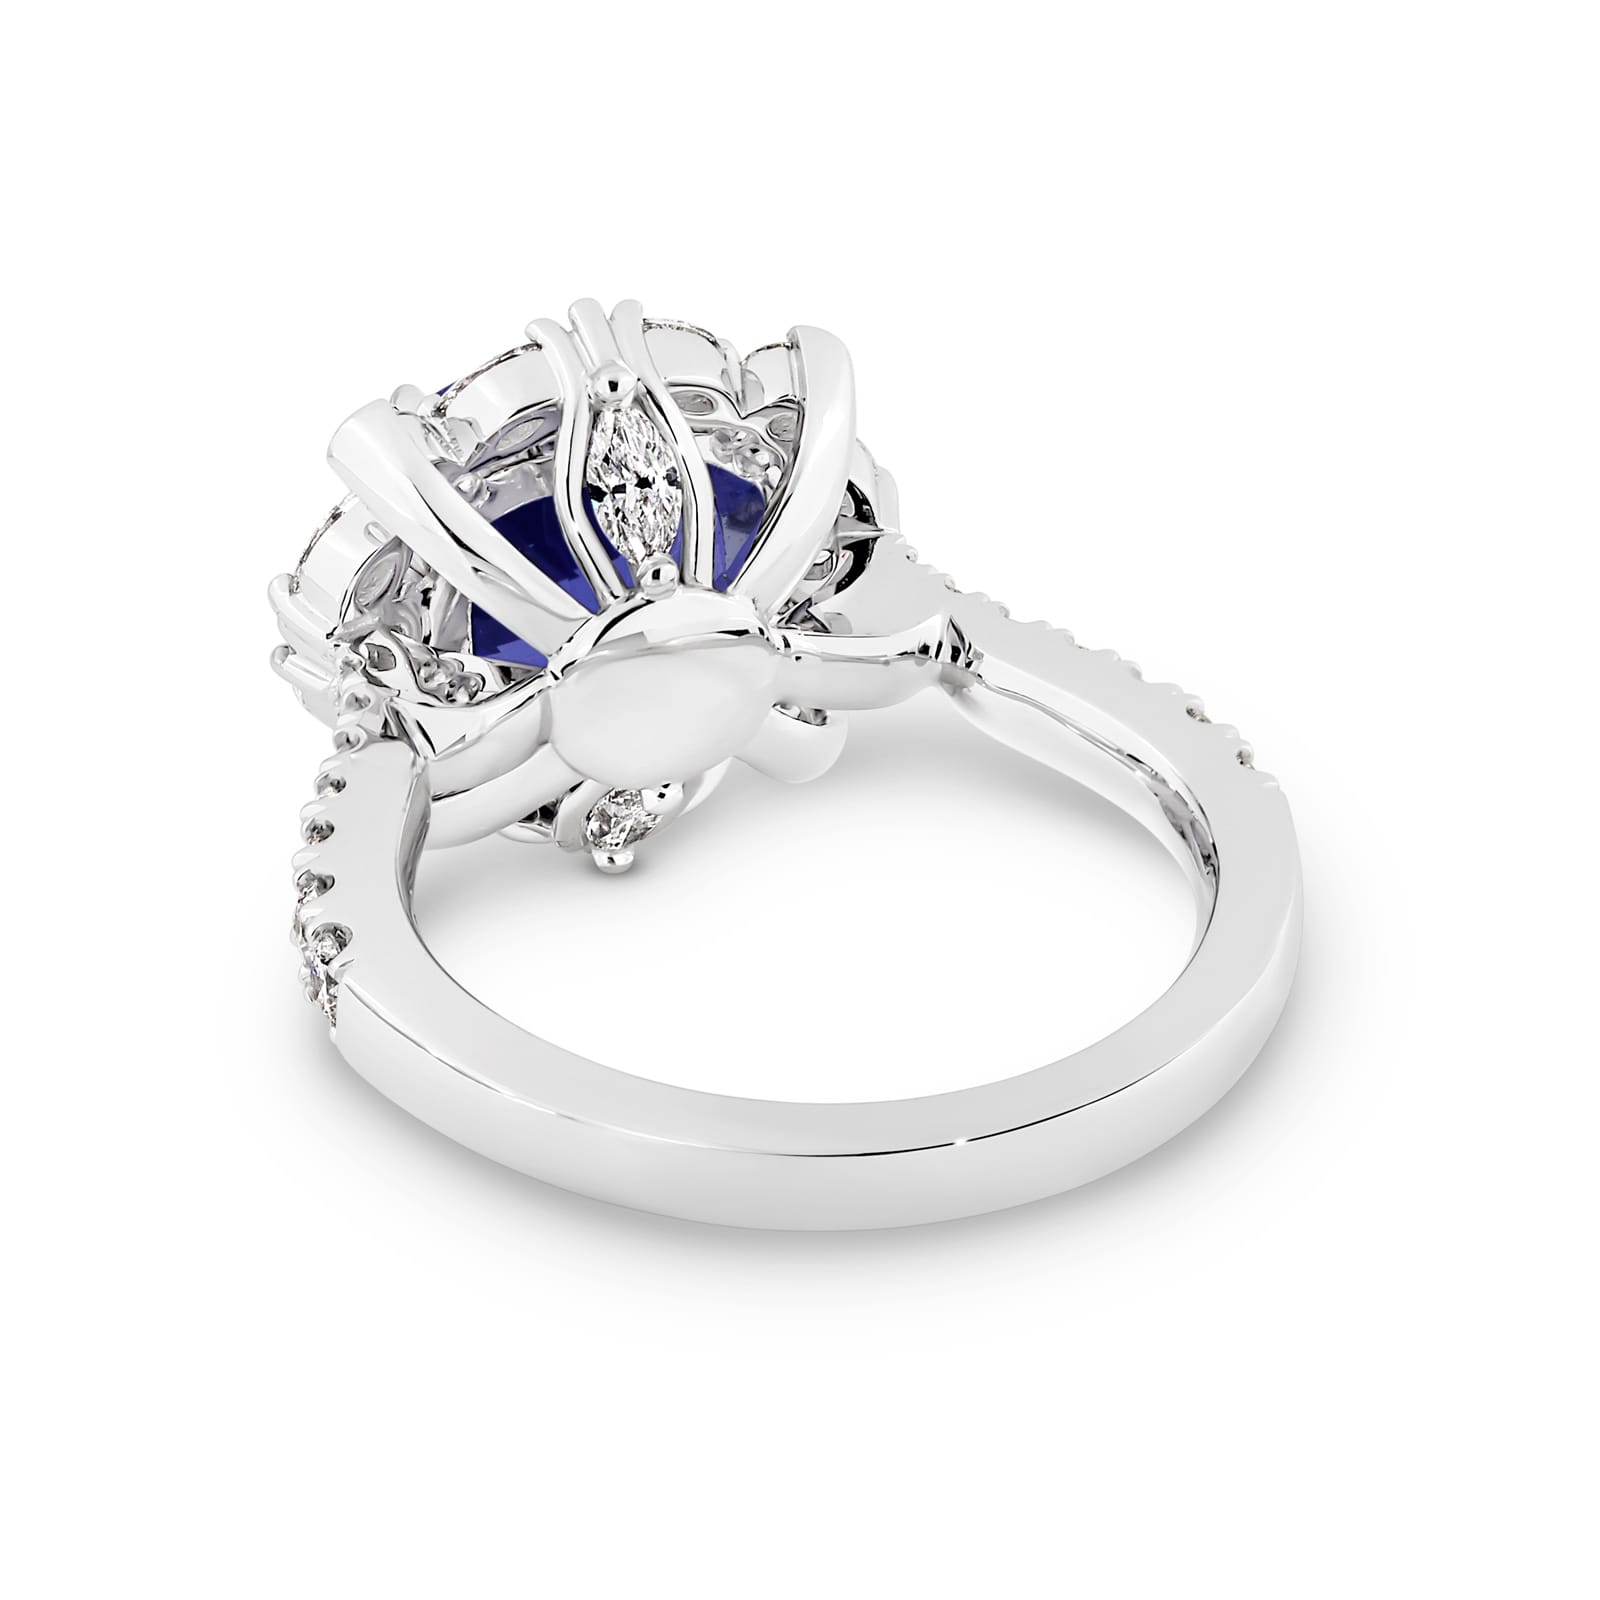 Violetta has a 4.06 carat cushion-cut tanzanite centre surrounded by a halo of alternating white round brilliant cut and marquise cut diamonds. Featuring 2 marquise cut diamonds underneath the ring and 14 round white diamonds on the band. She was designed and handcrafted by LeGassick's Master Jewellers, Gold Coast, Australia.